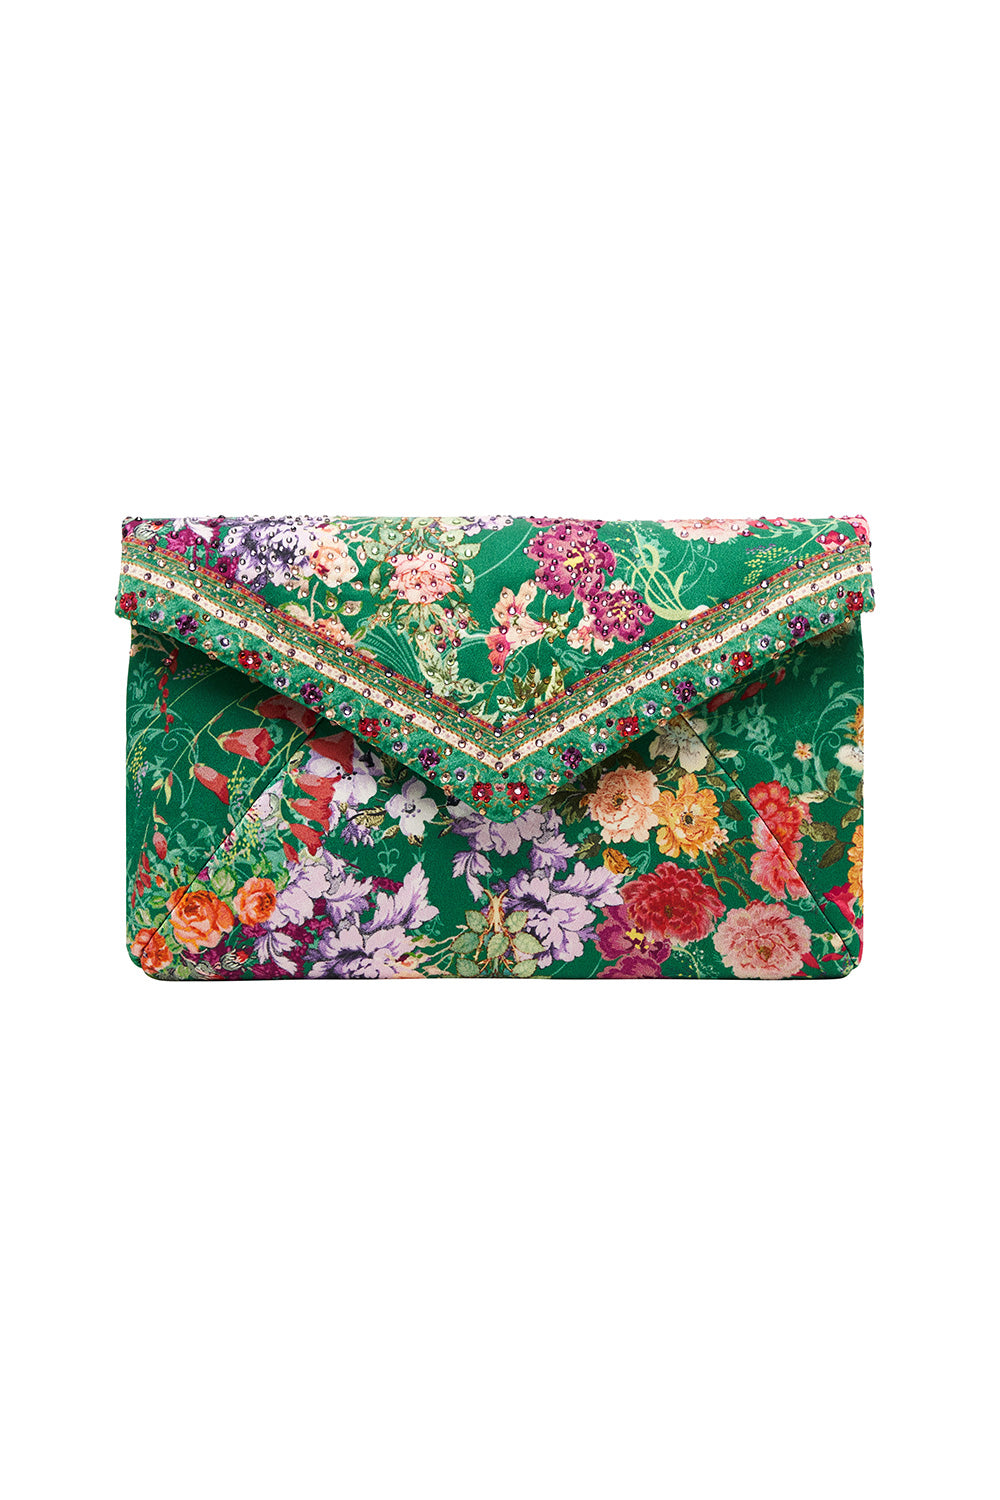 ENVELOPE CLUTCH DIARIES FROM A VILLA